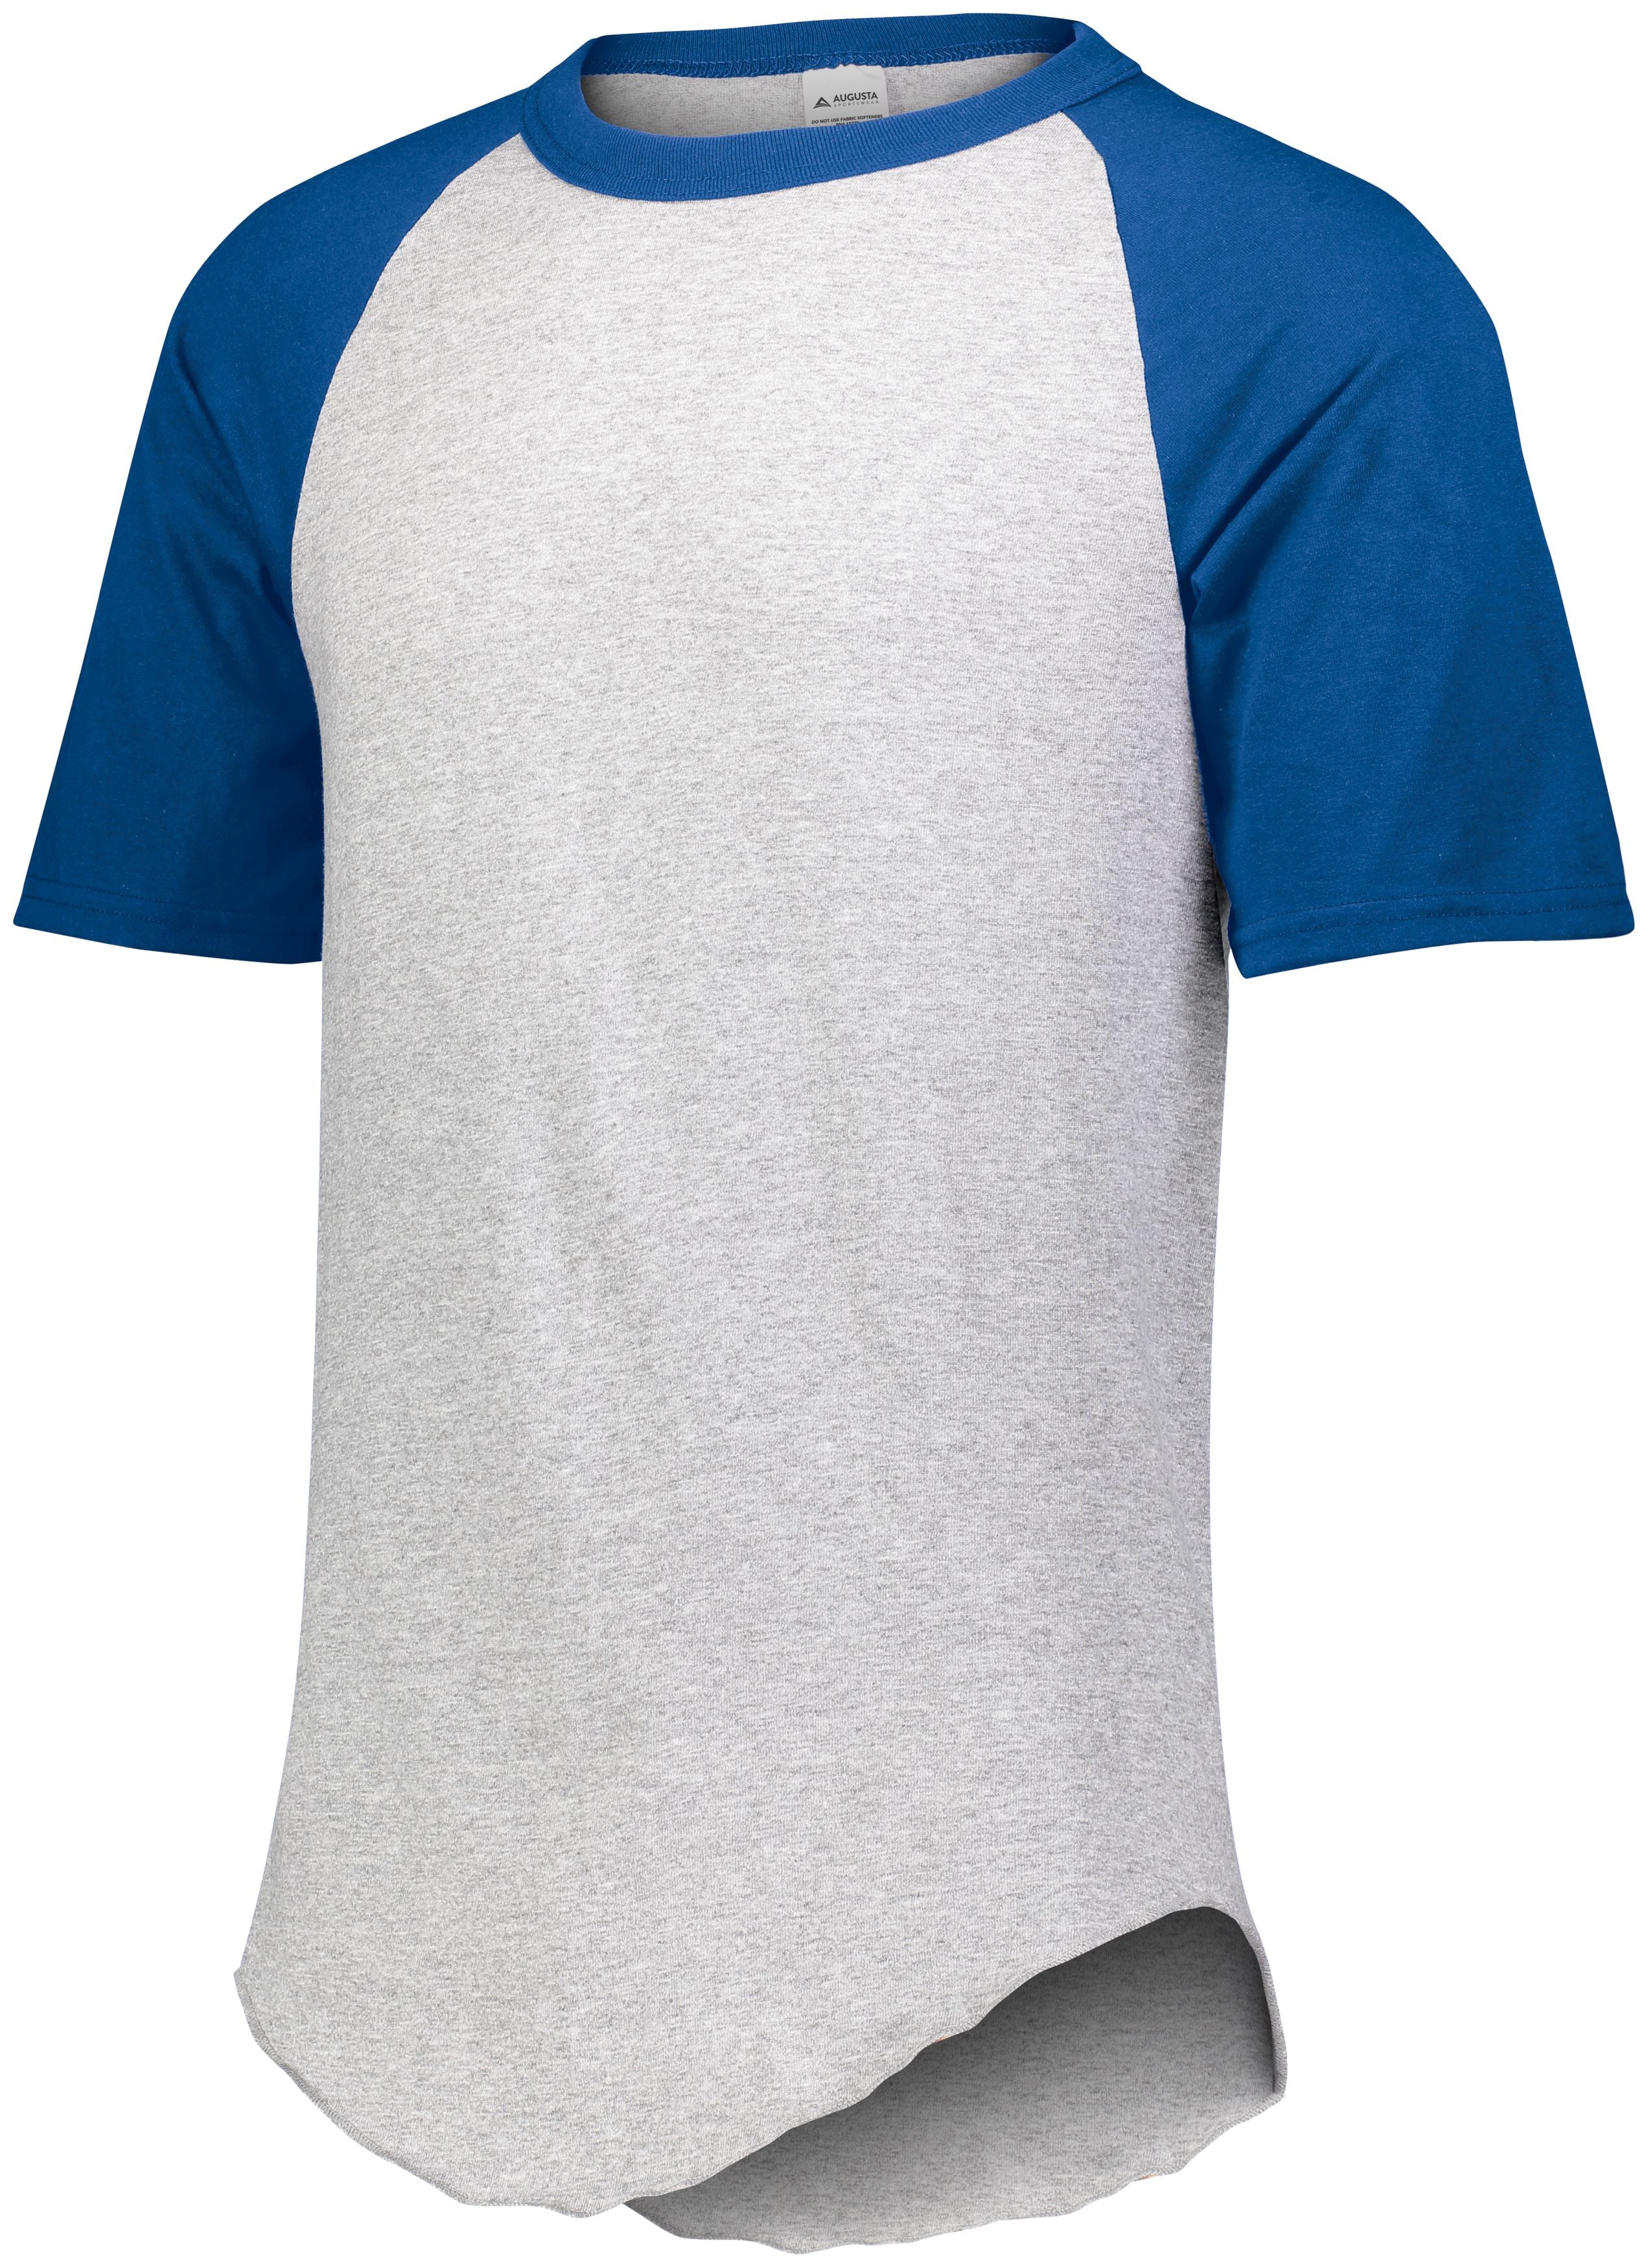 Augusta Sportswear Short Sleeve Baseball Jersey in Athletic Heather/Royal  -Part of the Adult, Adult-Jersey, Augusta-Products, Baseball, Shirts, All-Sports, All-Sports-1 product lines at KanaleyCreations.com